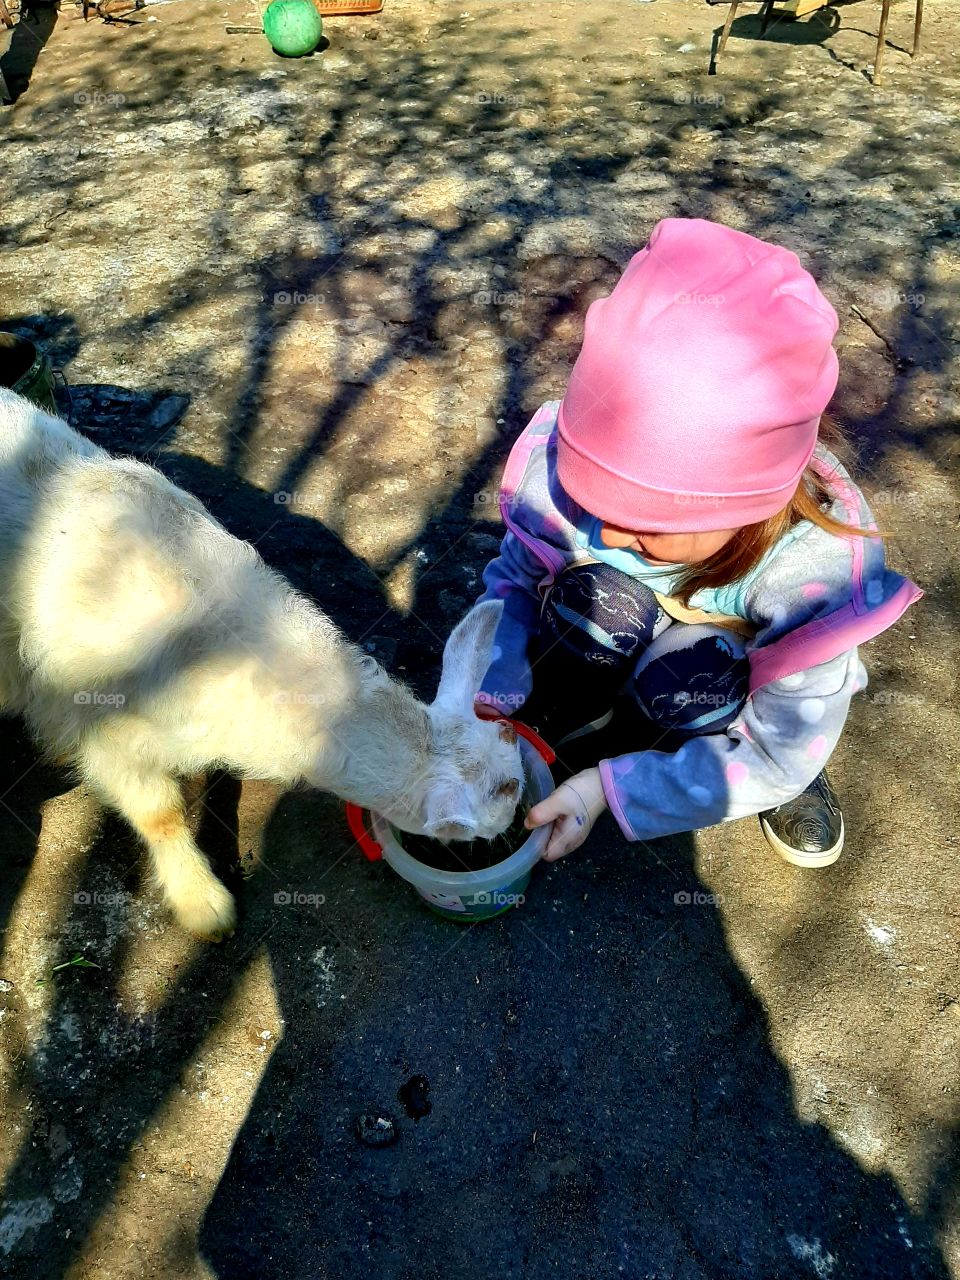 The girl feeds the goat